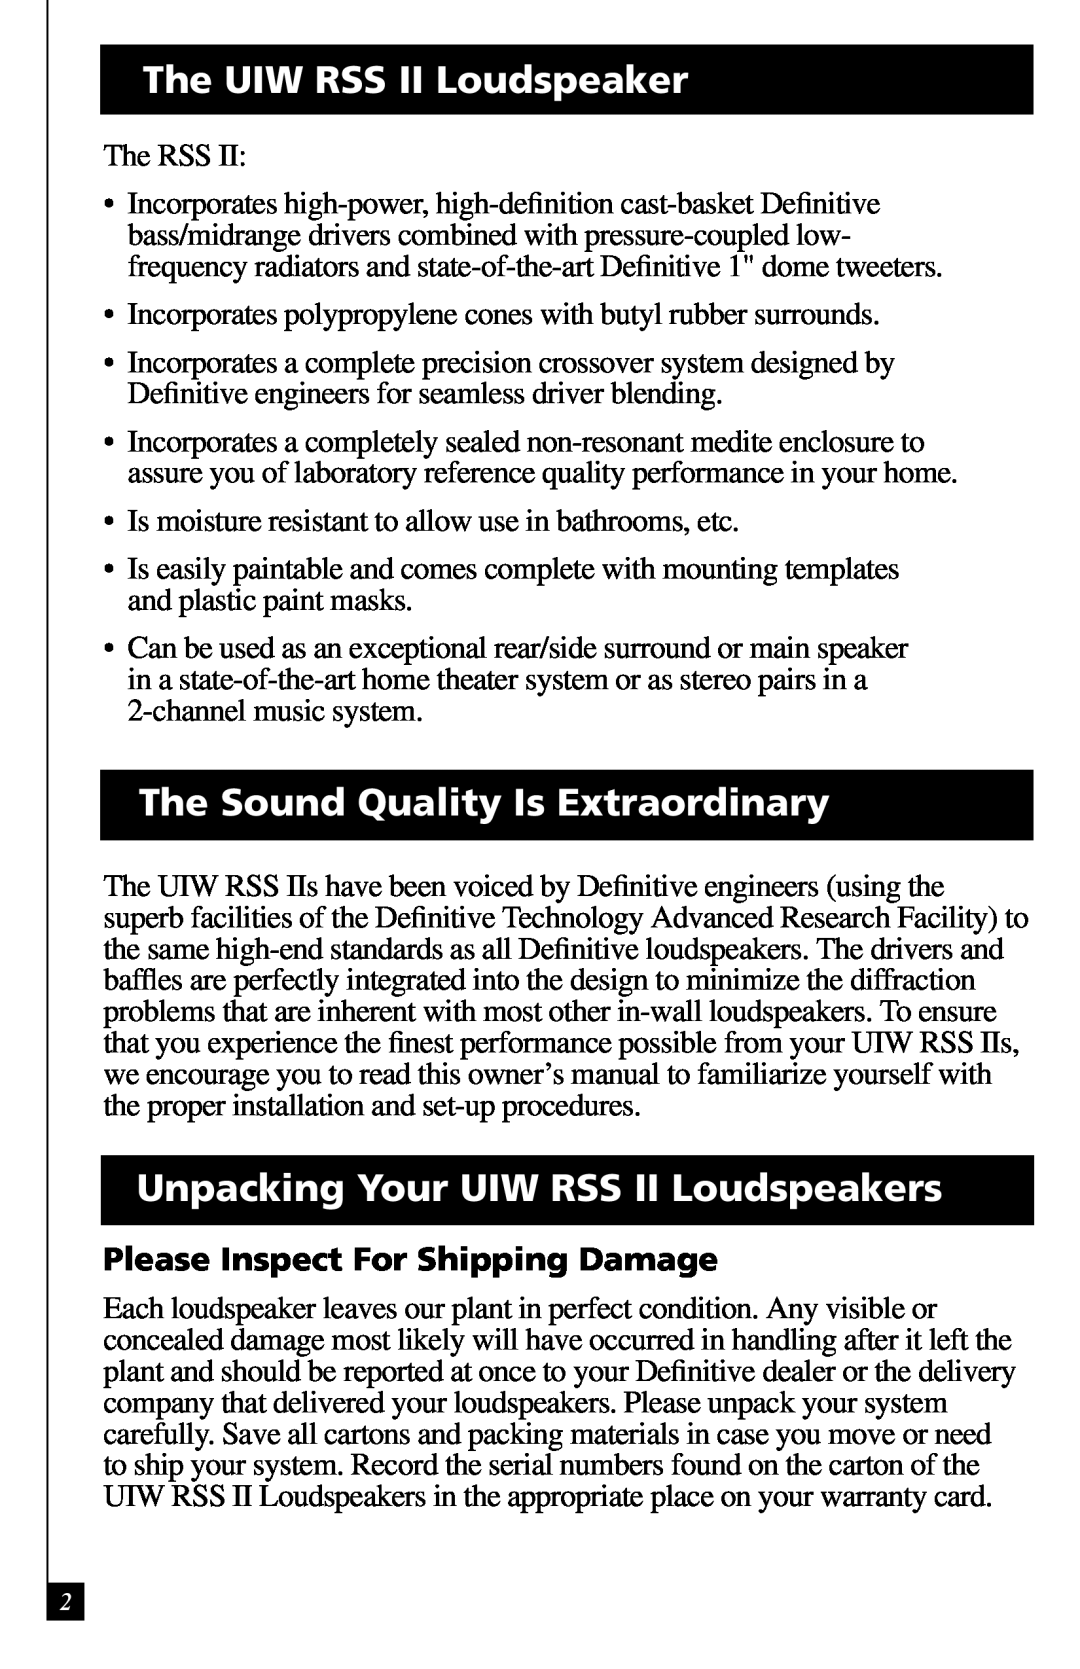 Definitive Technology owner manual The UIW RSS II Loudspeaker, The Sound Quality Is Extraordinary 